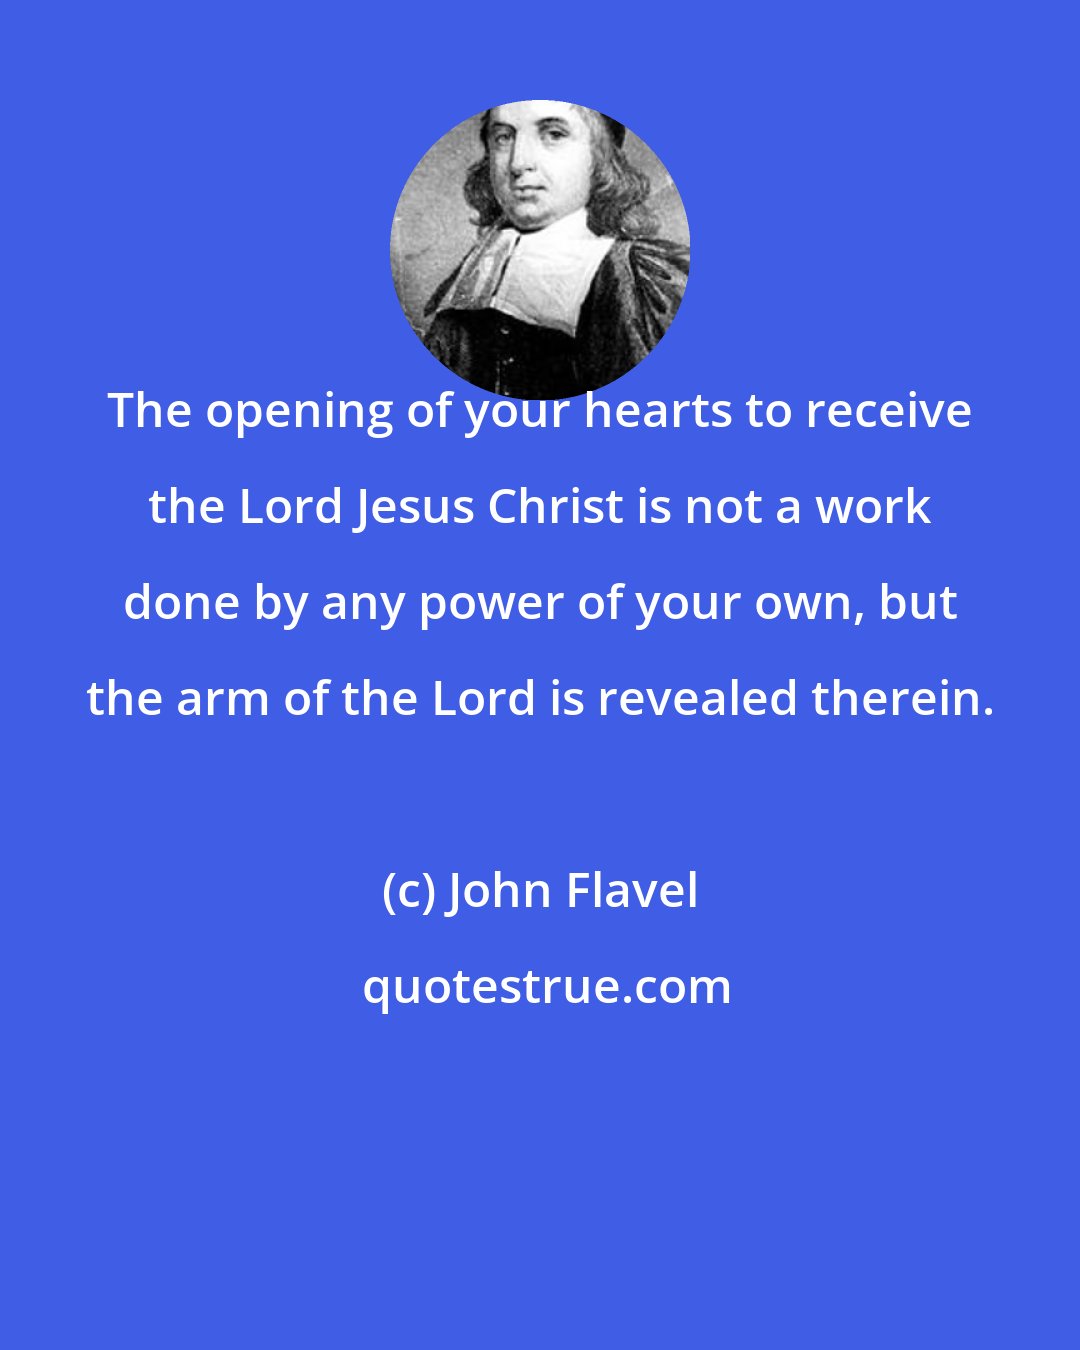 John Flavel: The opening of your hearts to receive the Lord Jesus Christ is not a work done by any power of your own, but the arm of the Lord is revealed therein.